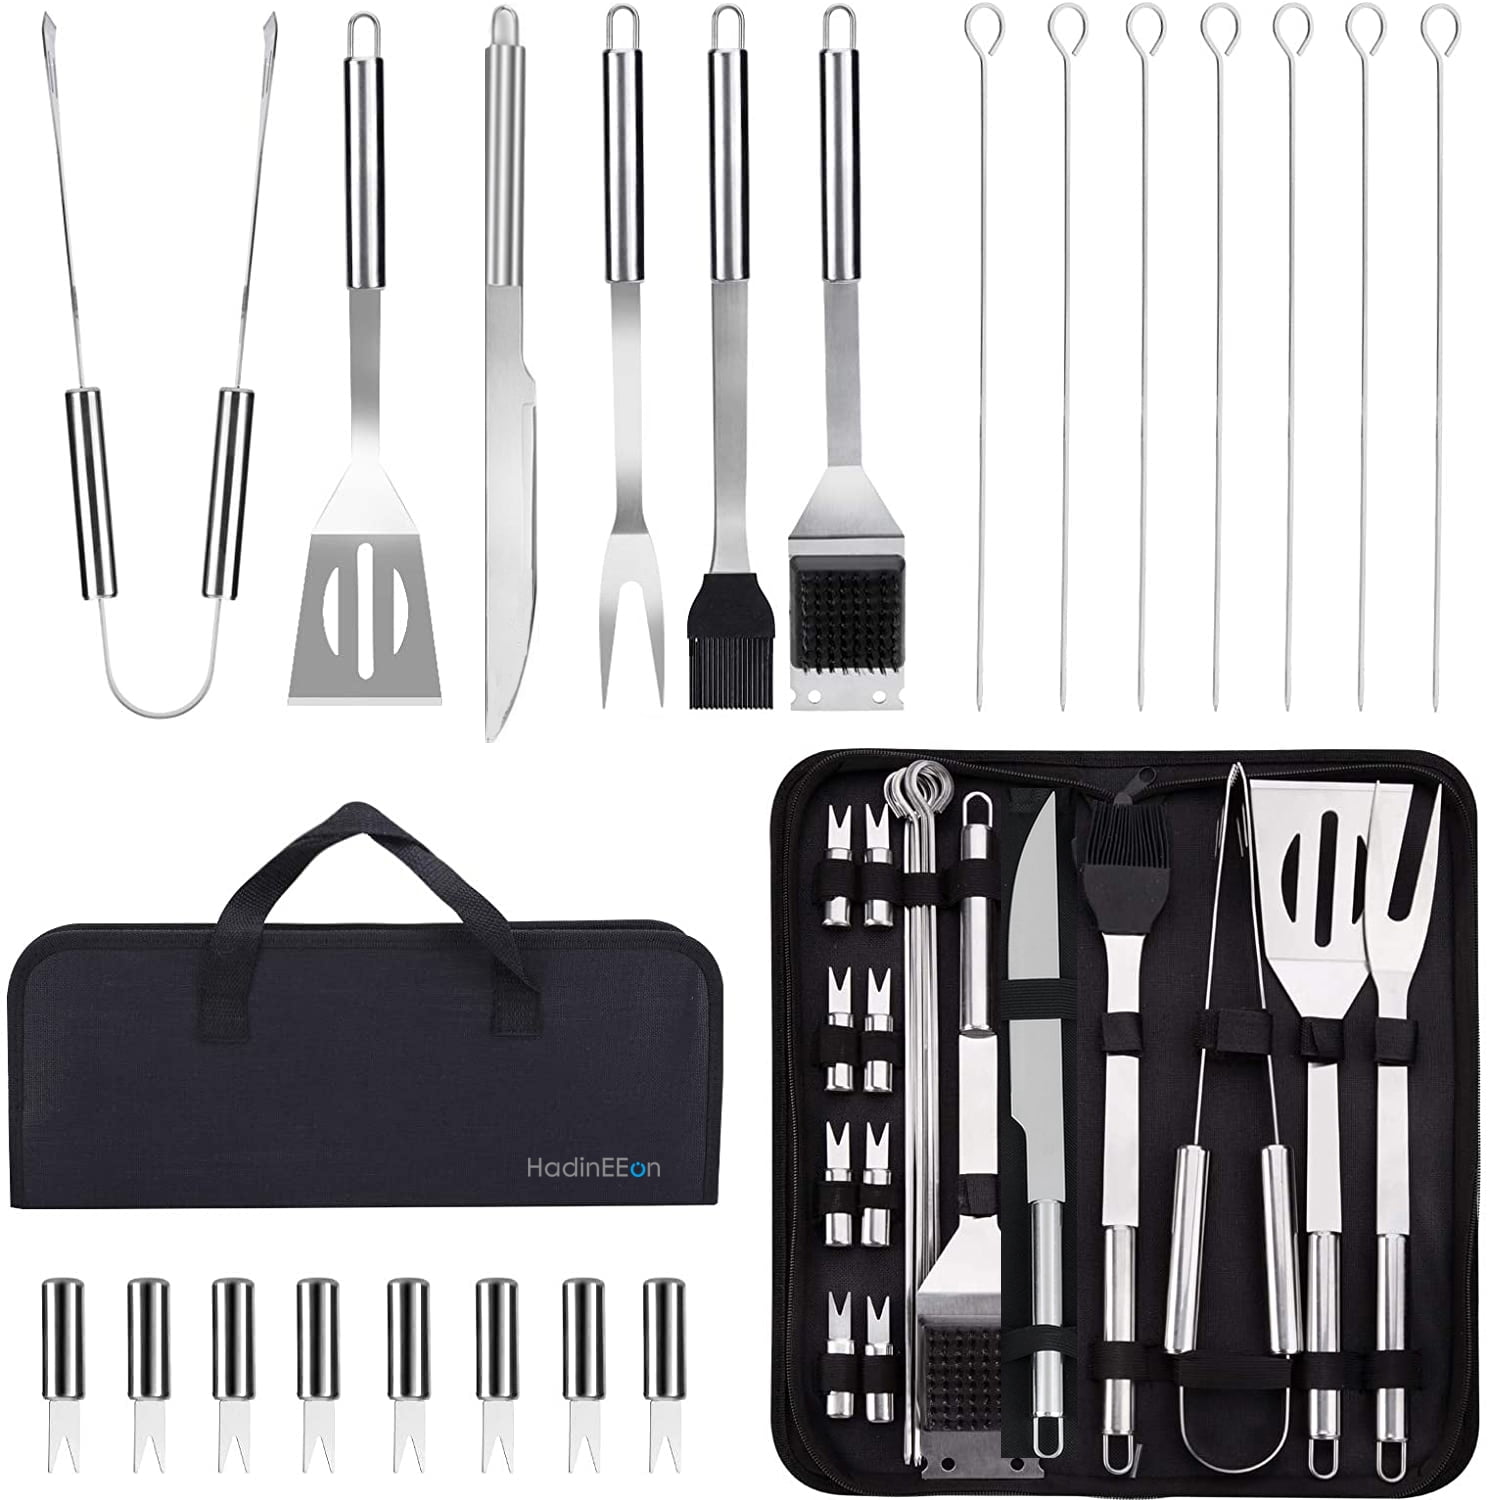 9pcs BBQ Stainless Steel Barbecue Grill Utensils Kit Accessories Tool Set 